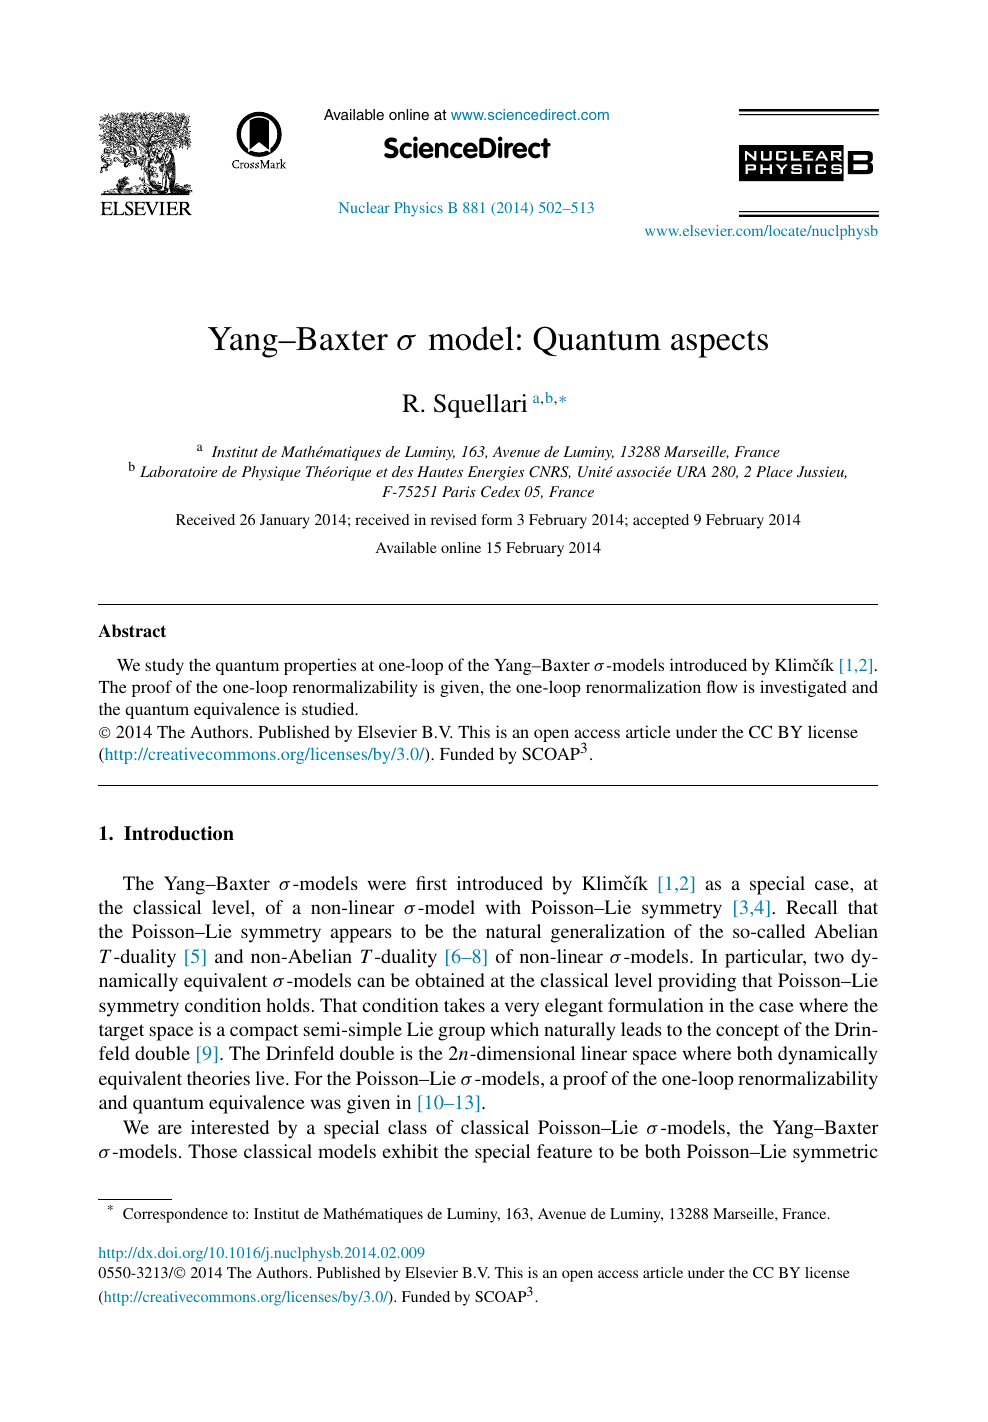 Yang Baxter S Model Quantum Aspects Topic Of Research Paper In Physical Sciences Download Scholarly Article Pdf And Read For Free On Cyberleninka Open Science Hub